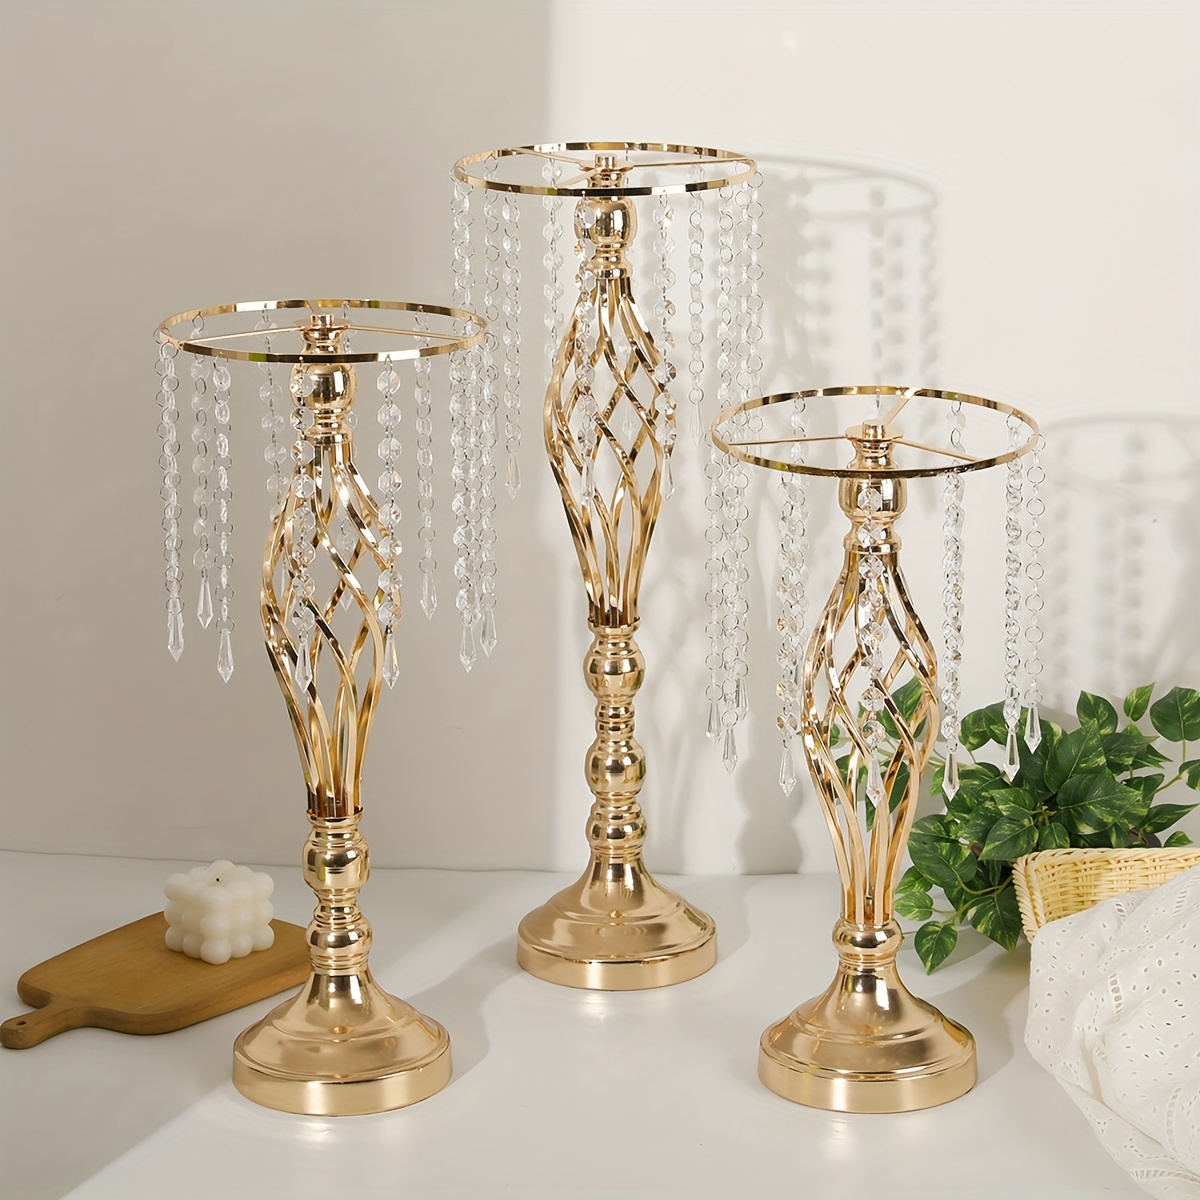 

1pc, Golden Flower Stand Wedding Flower Centerpieces For Tables, Crystal Vases Metal Floral Arrangement Stand For Wedding Reception Tabletop Party Decor